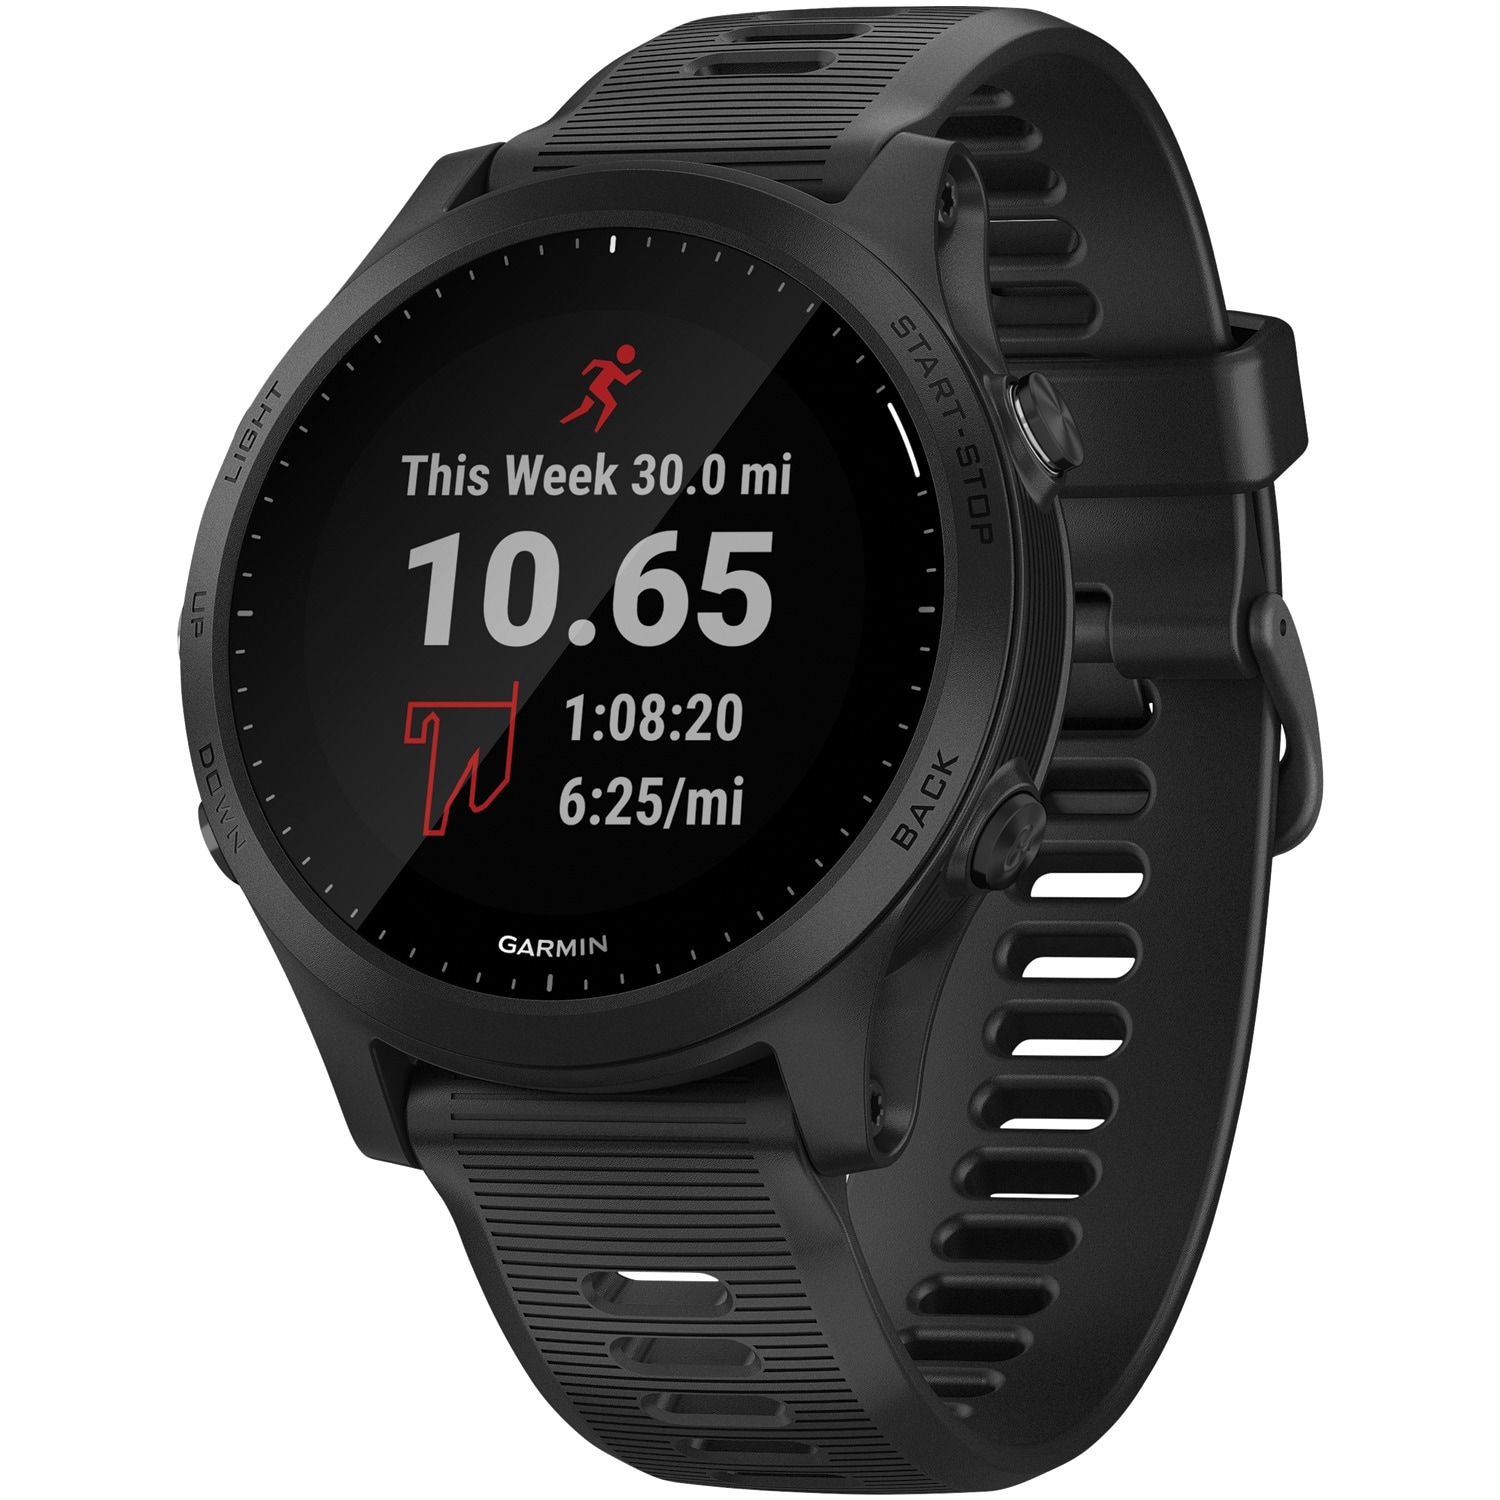 Garmin Forerunner Fitness Tracker with Step Counter, Heart Rate Monitor Gps Enabled Lowes.com